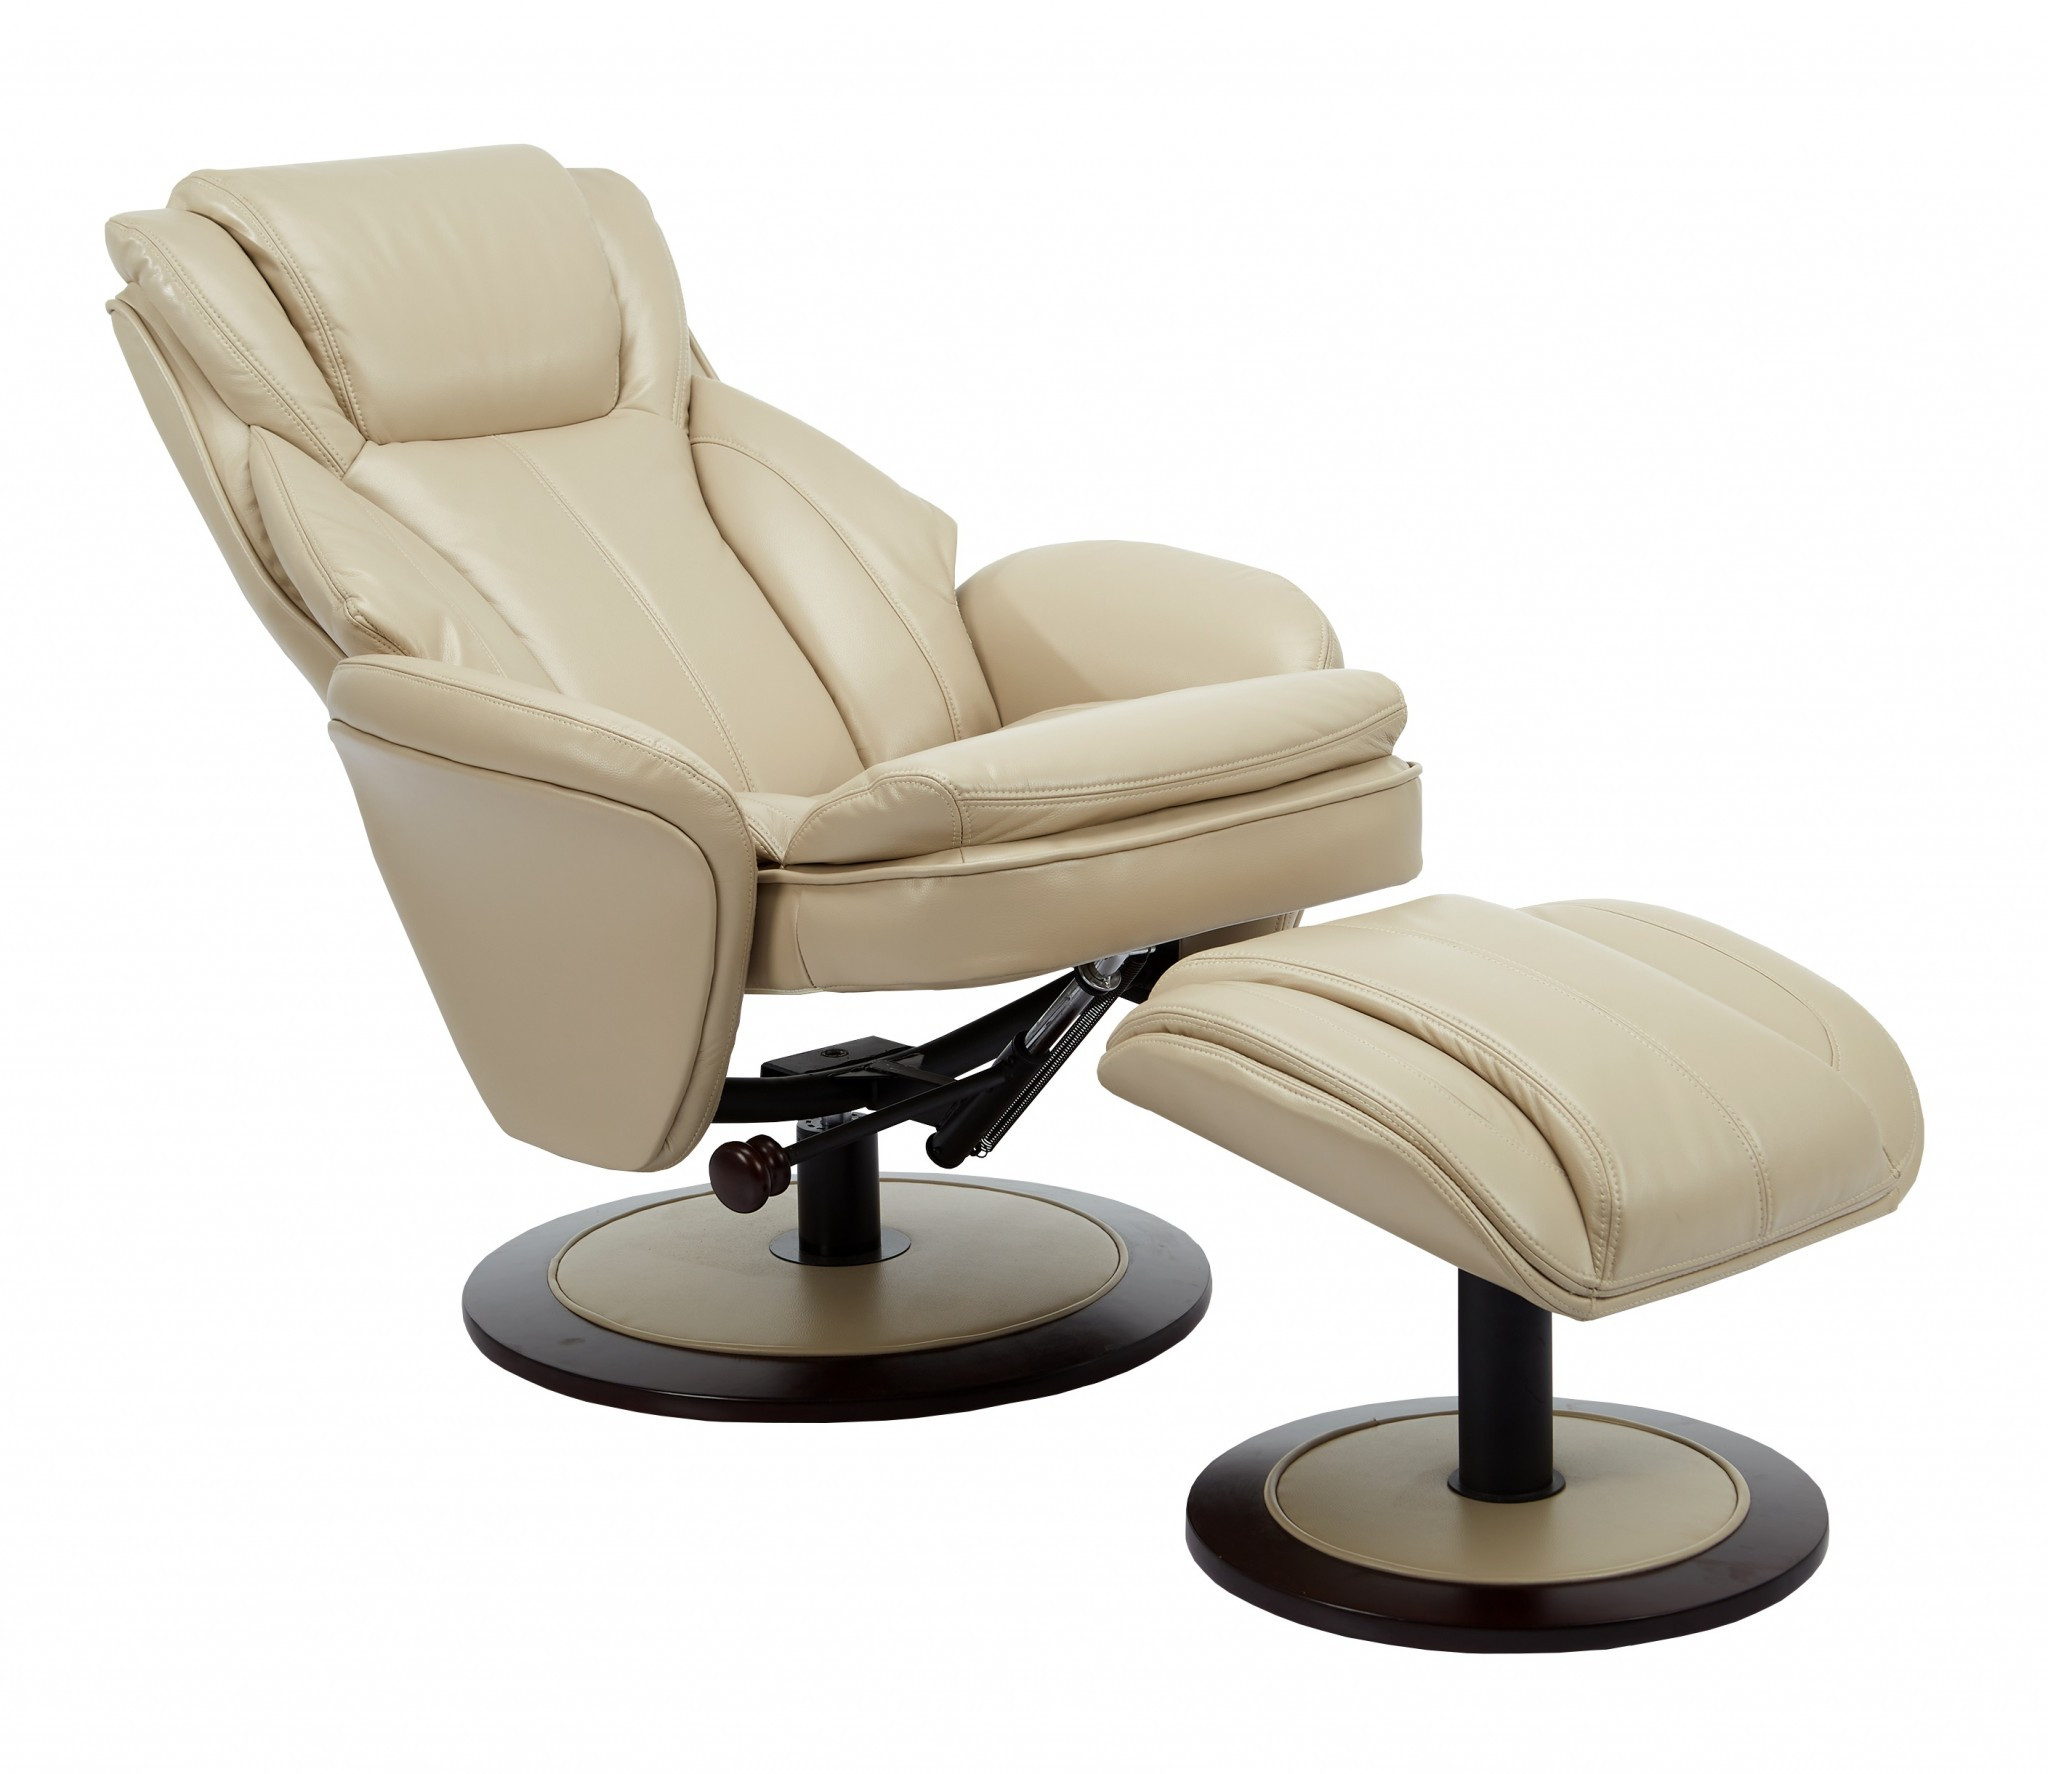 Cobblestone Faux Leather Swivel Adjustable Recliner and Ottoman Set